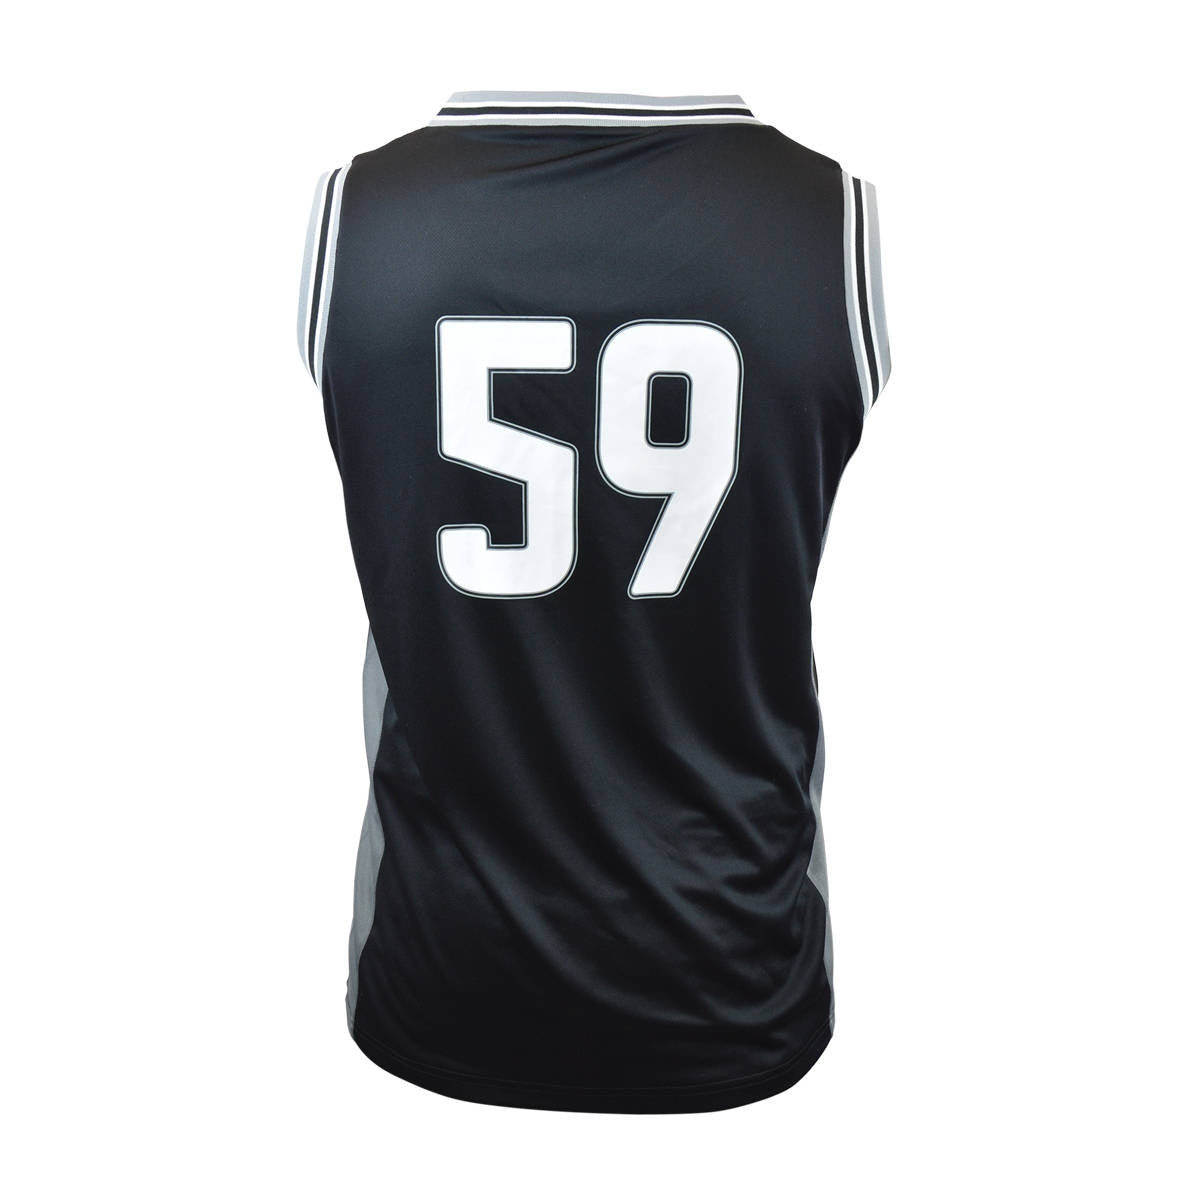 The back of a Guinness UK basketball jersey with the number 59 on it.